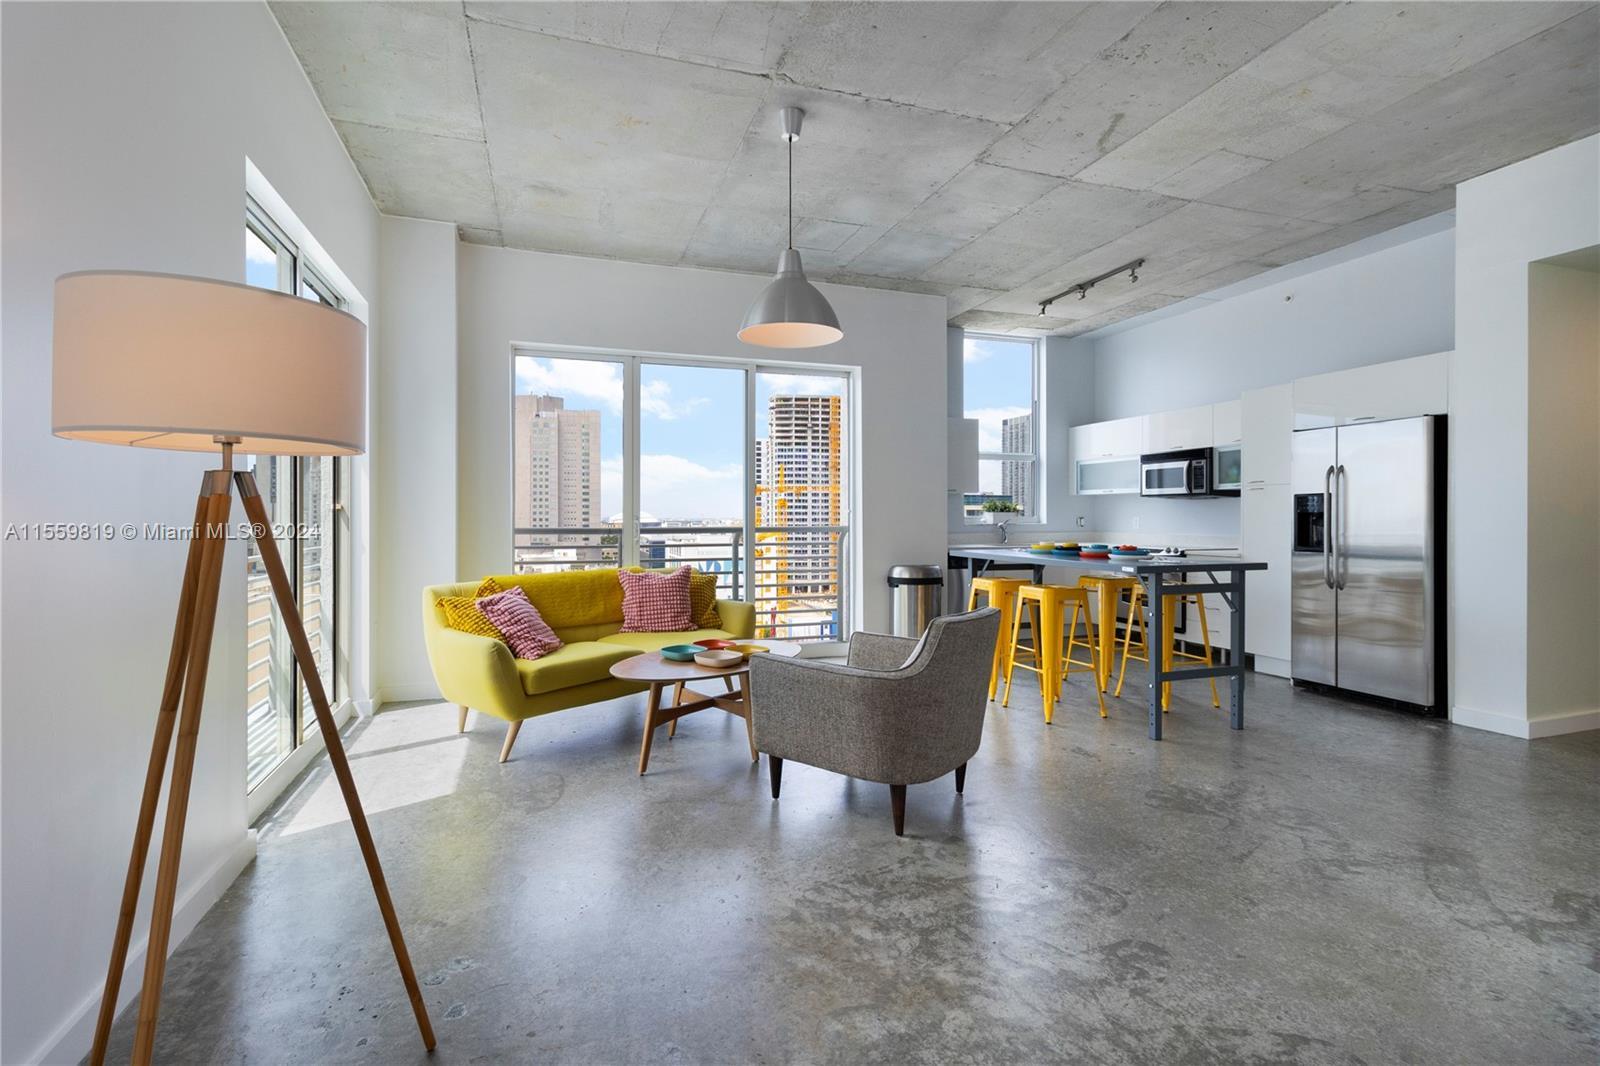 Discover the best of Miami in this spacious, open-concept corner unit at The Loft Downtown II.Enjoy 